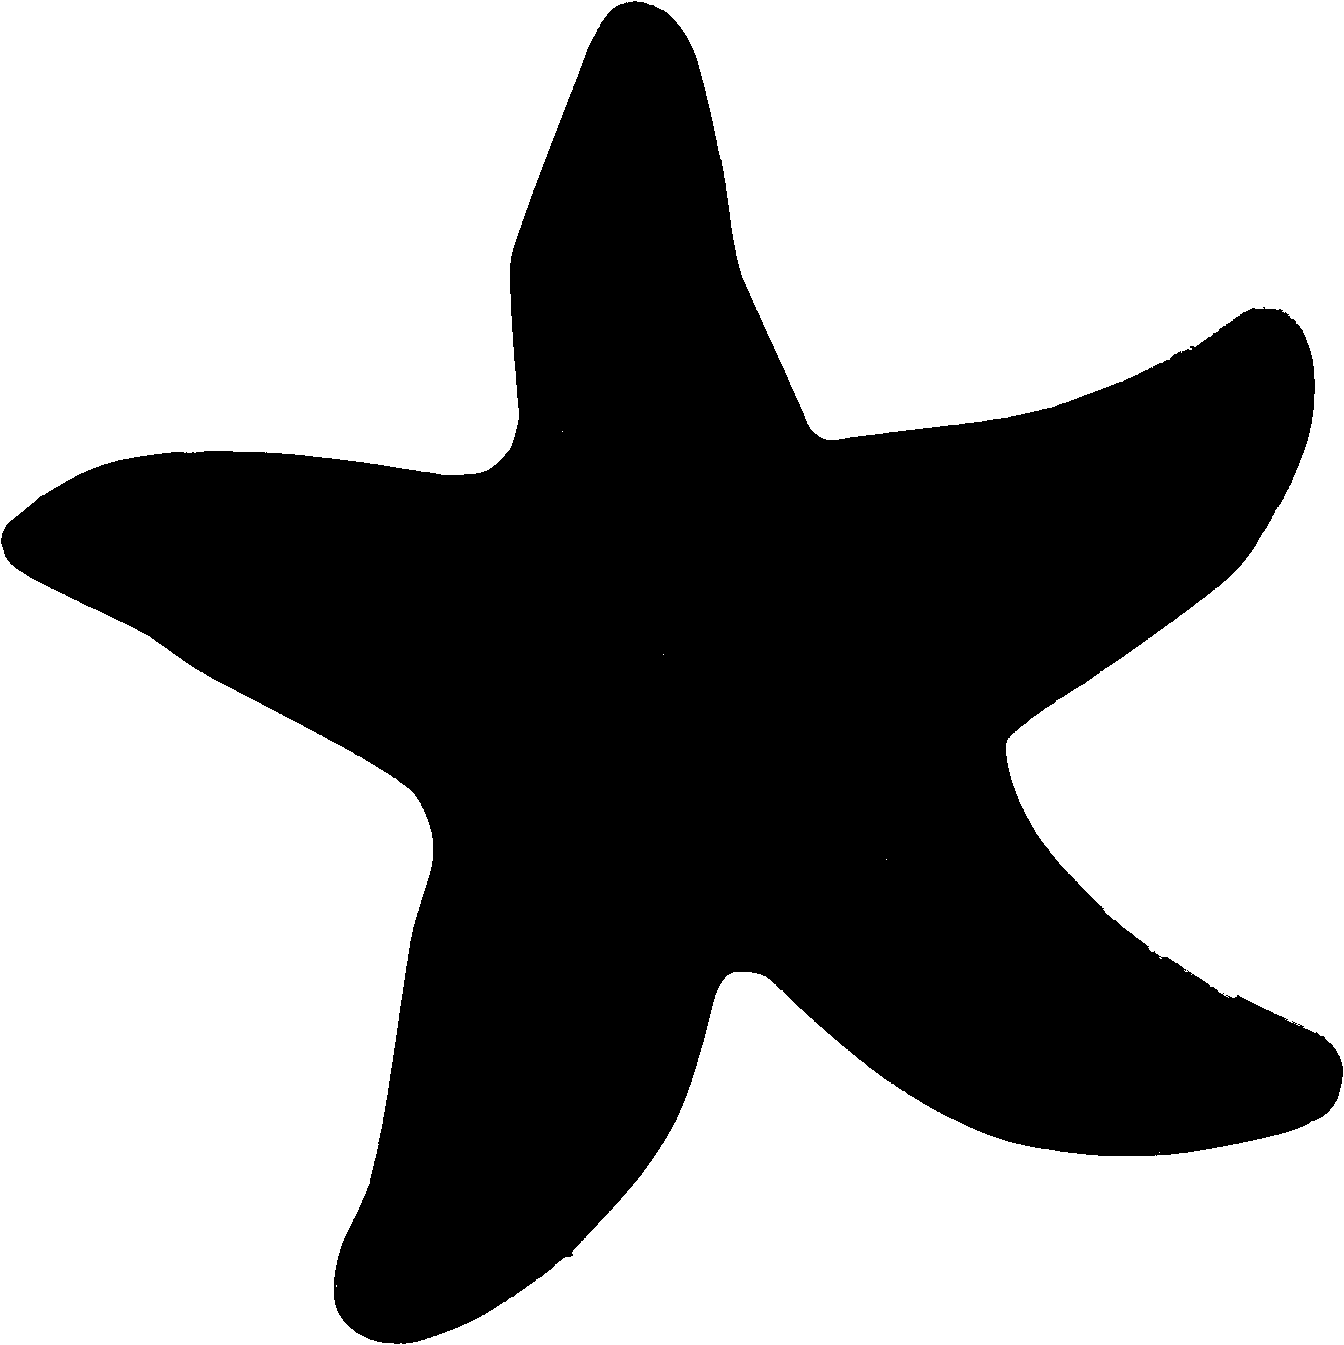 Starfish Clipart Black And White | Clipart Panda - Free Clipart Images